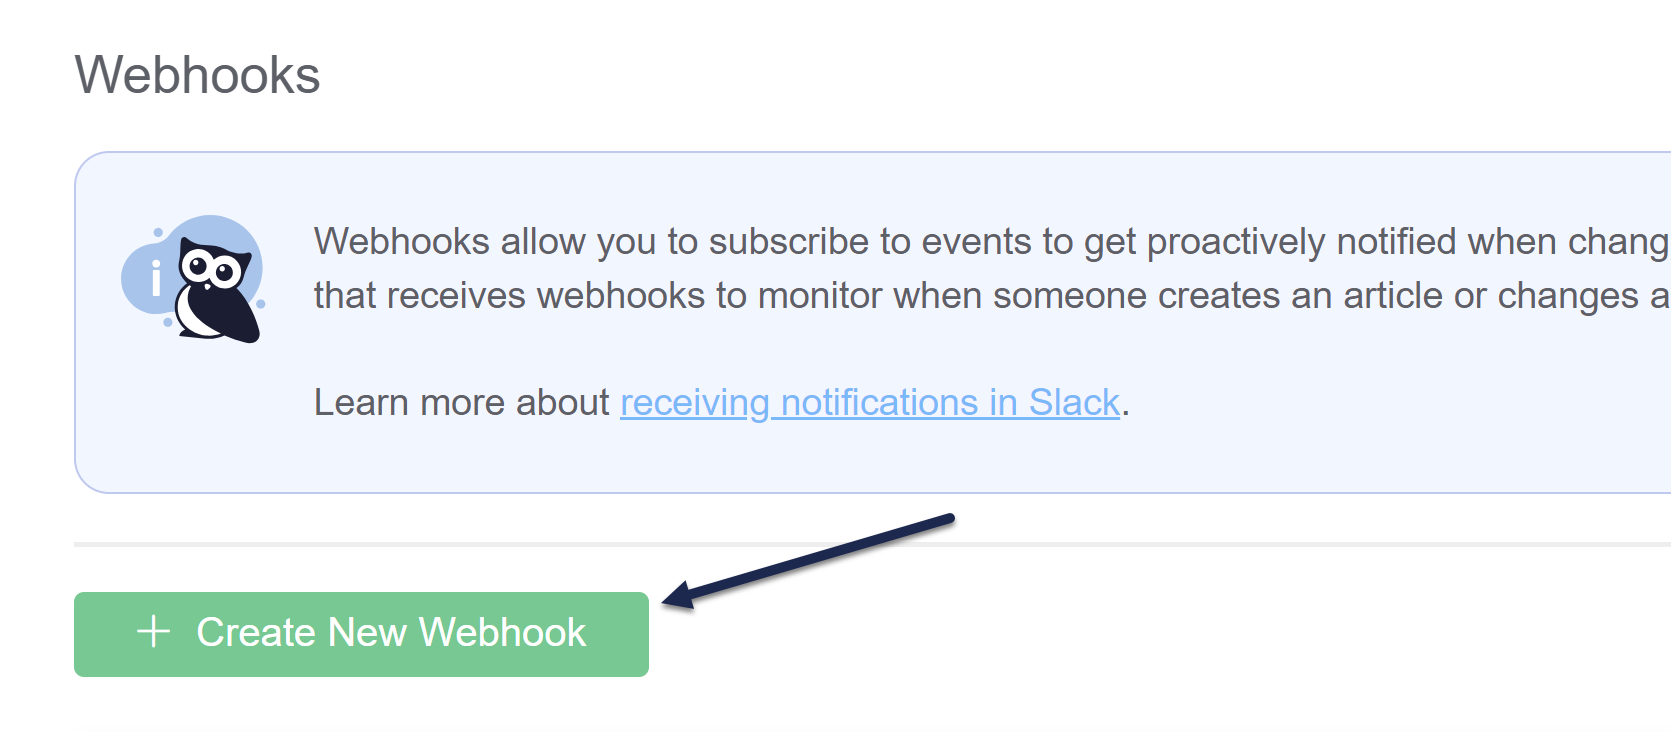 A screenshot of the Webhooks page in KnowledgeOwl with an arrow pointing to the + Create New Webhook button